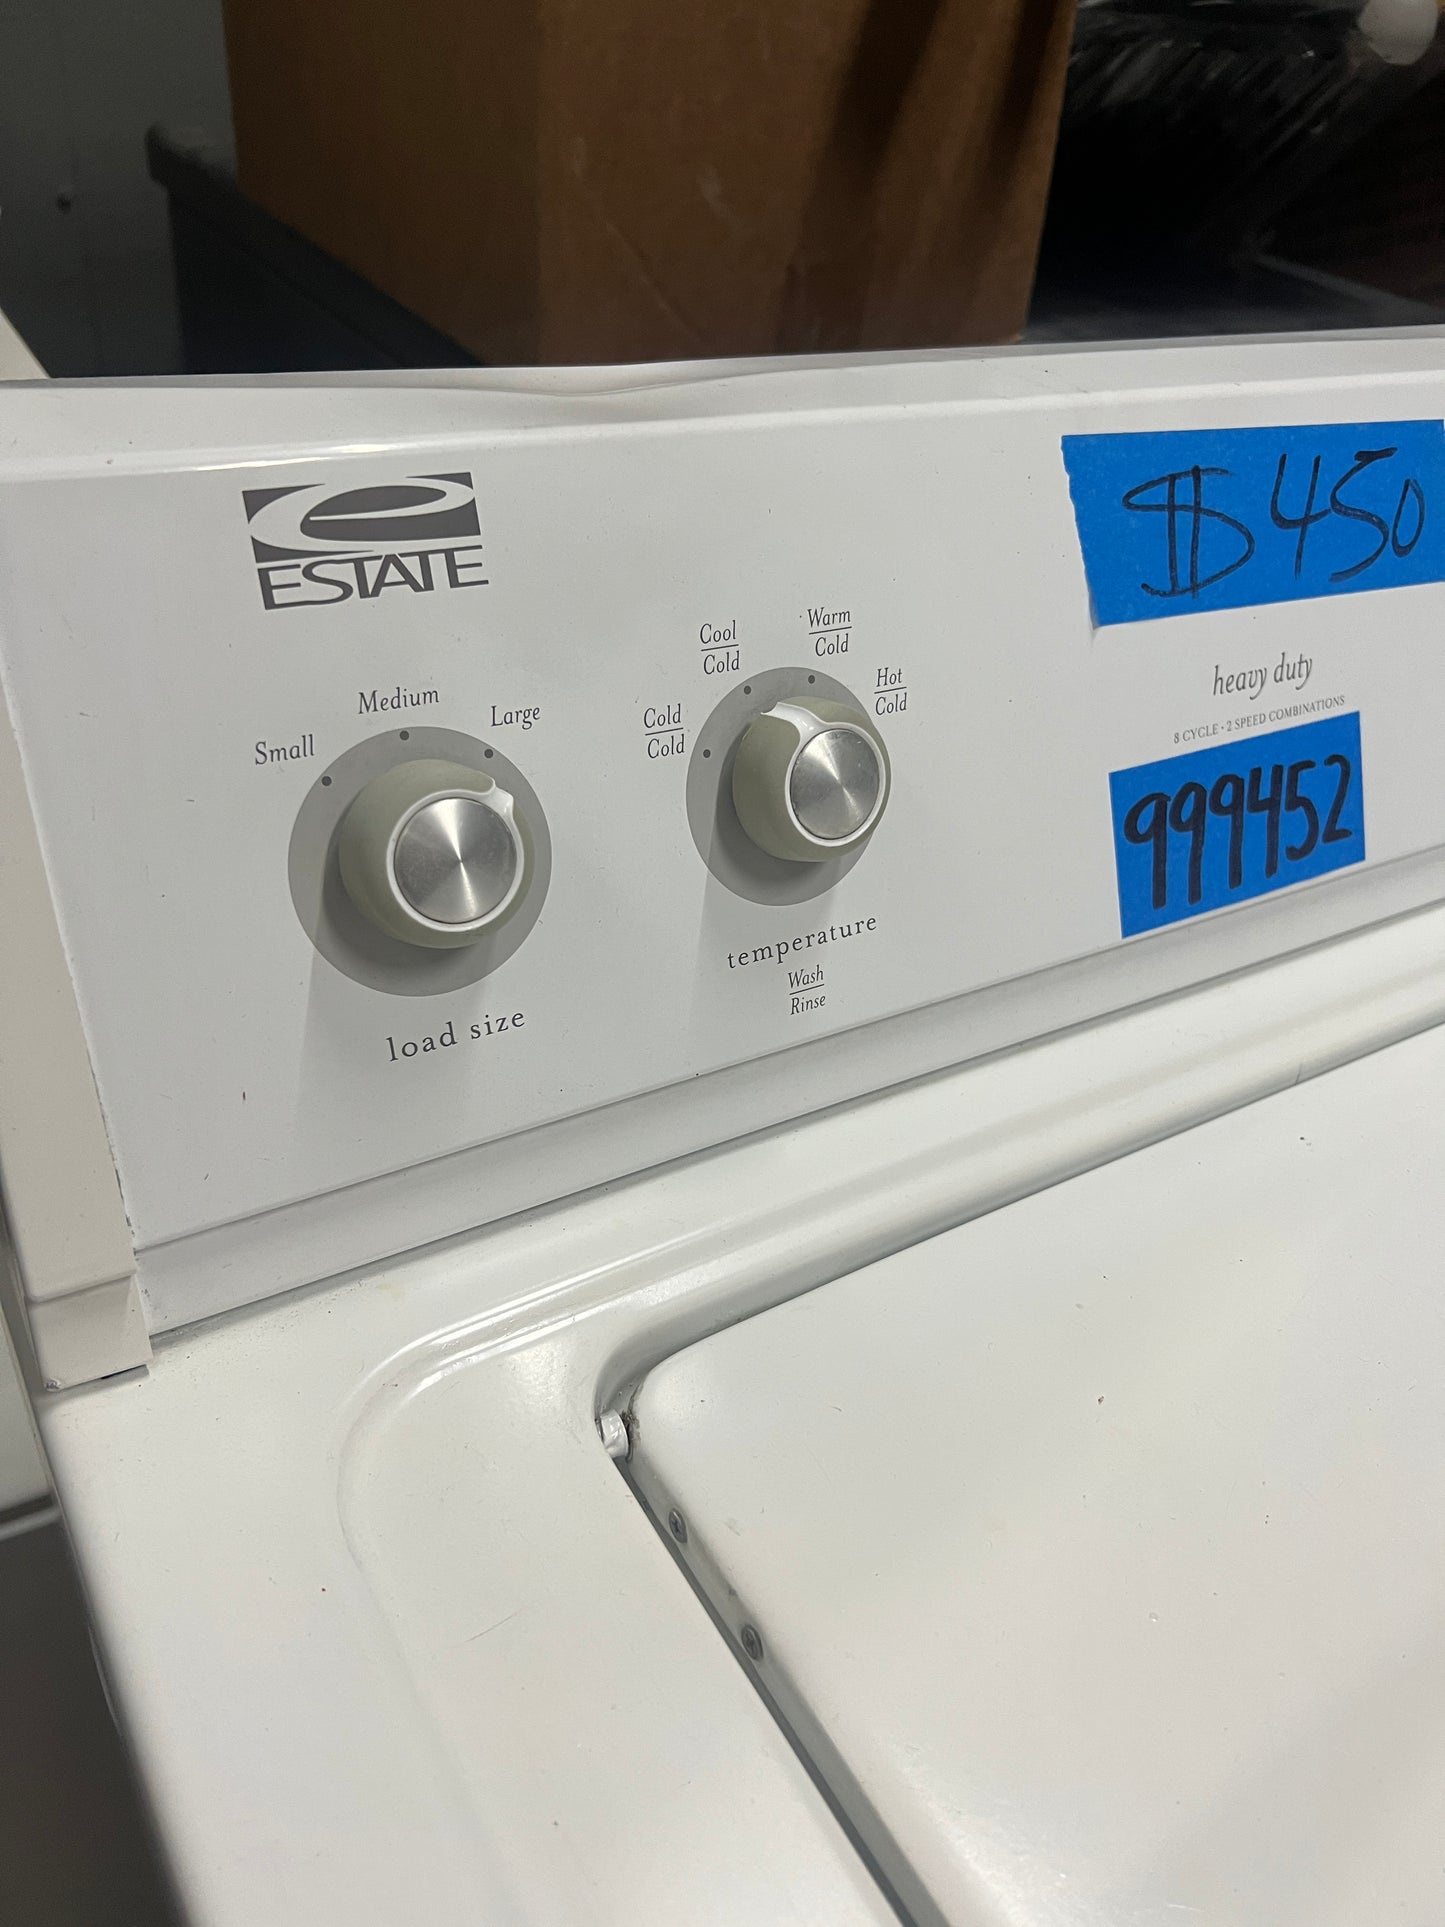 Estate Top Load Washer, Used & working, In White, ETW4400XQ0, 999452